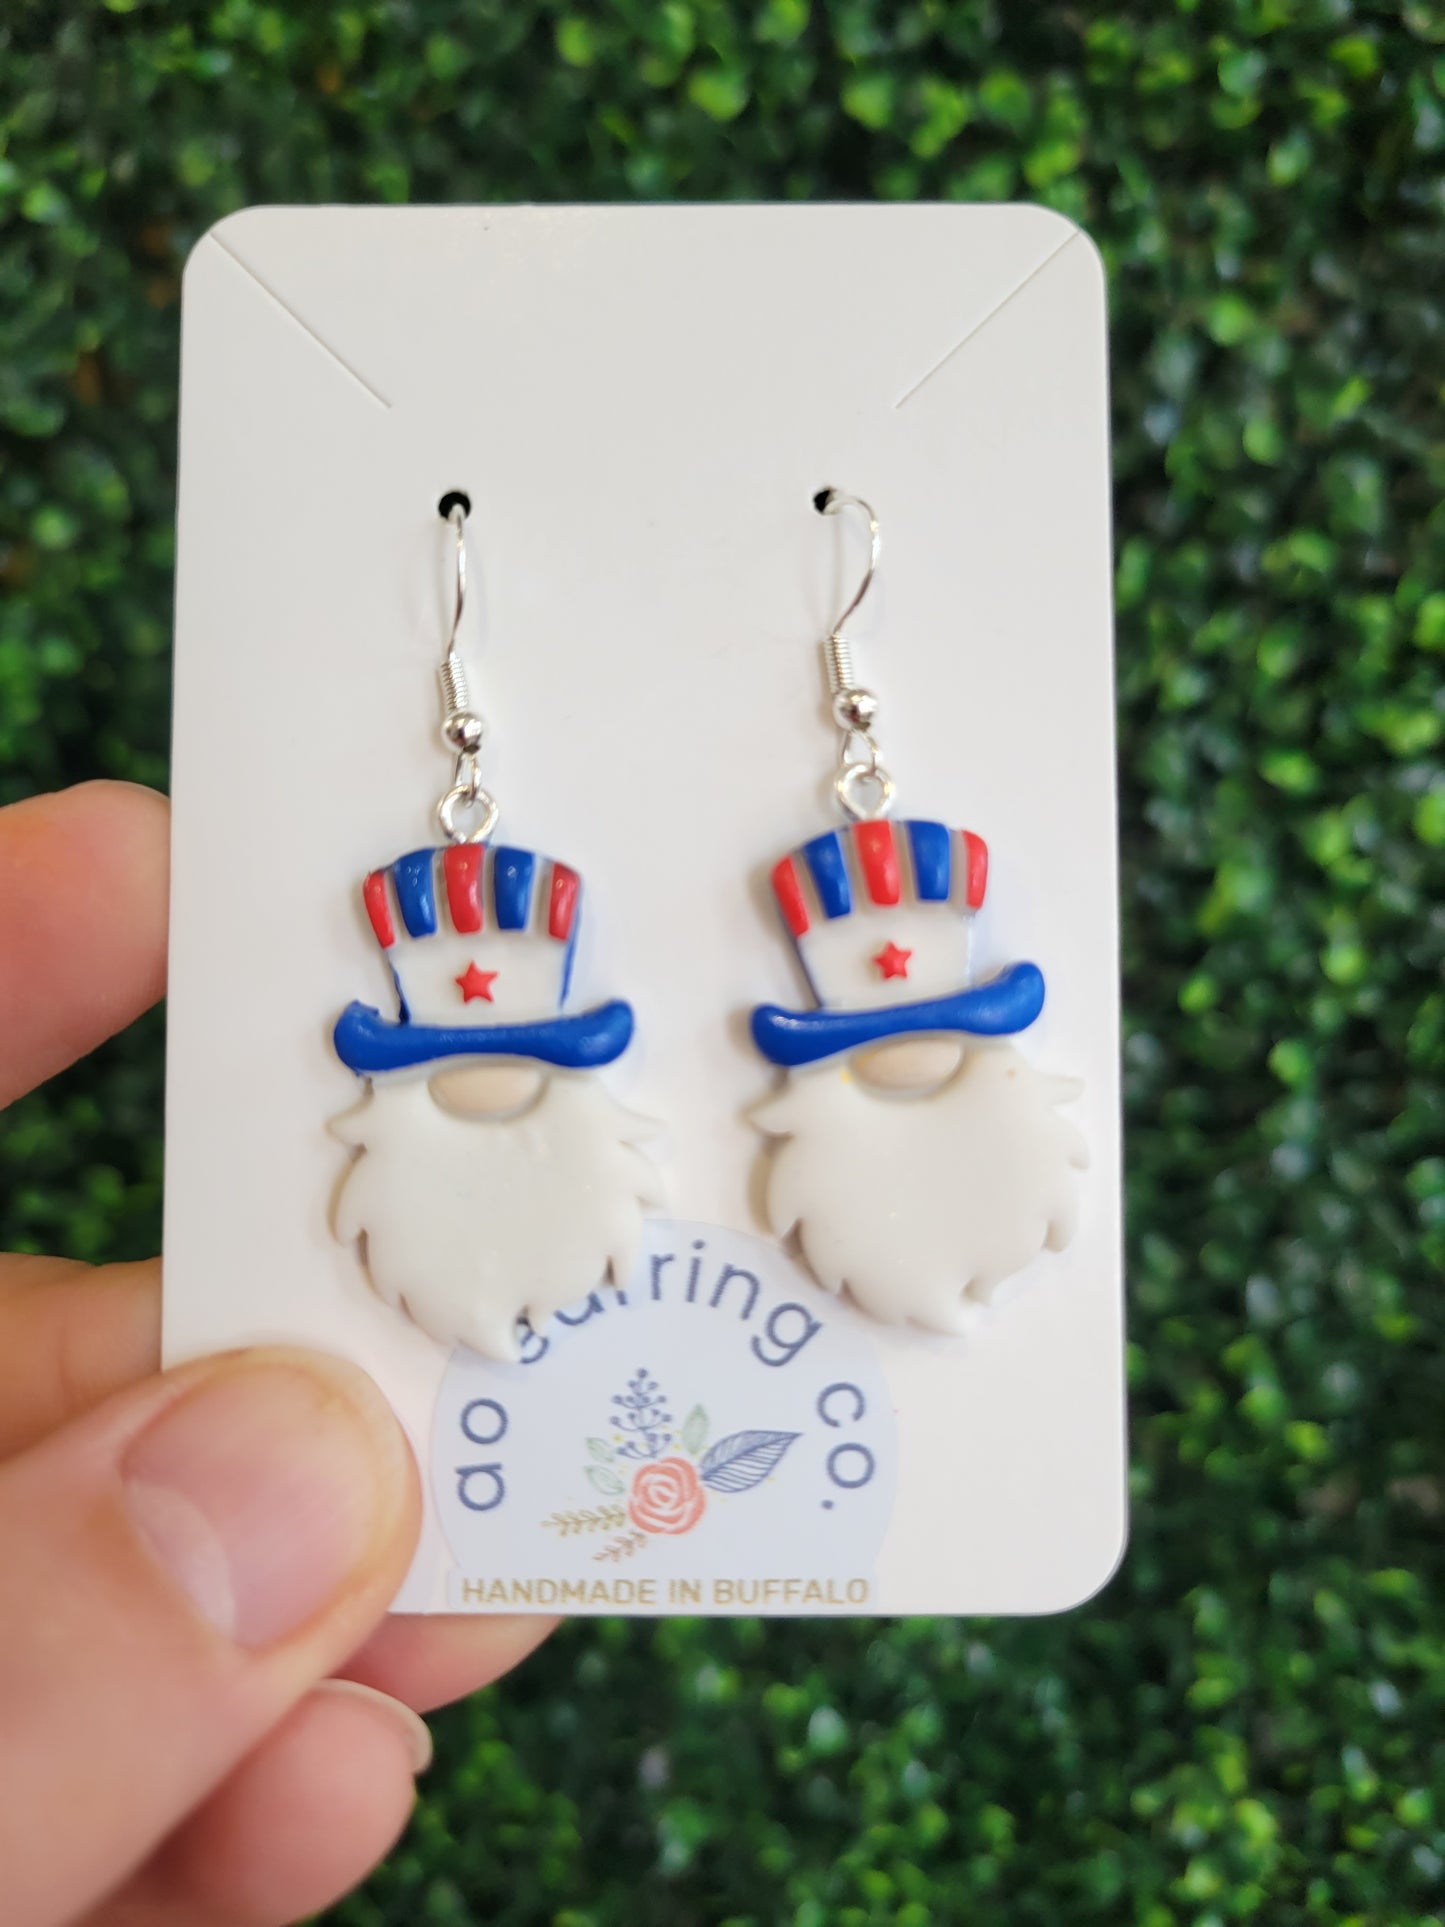 Red White and Blue Dangles